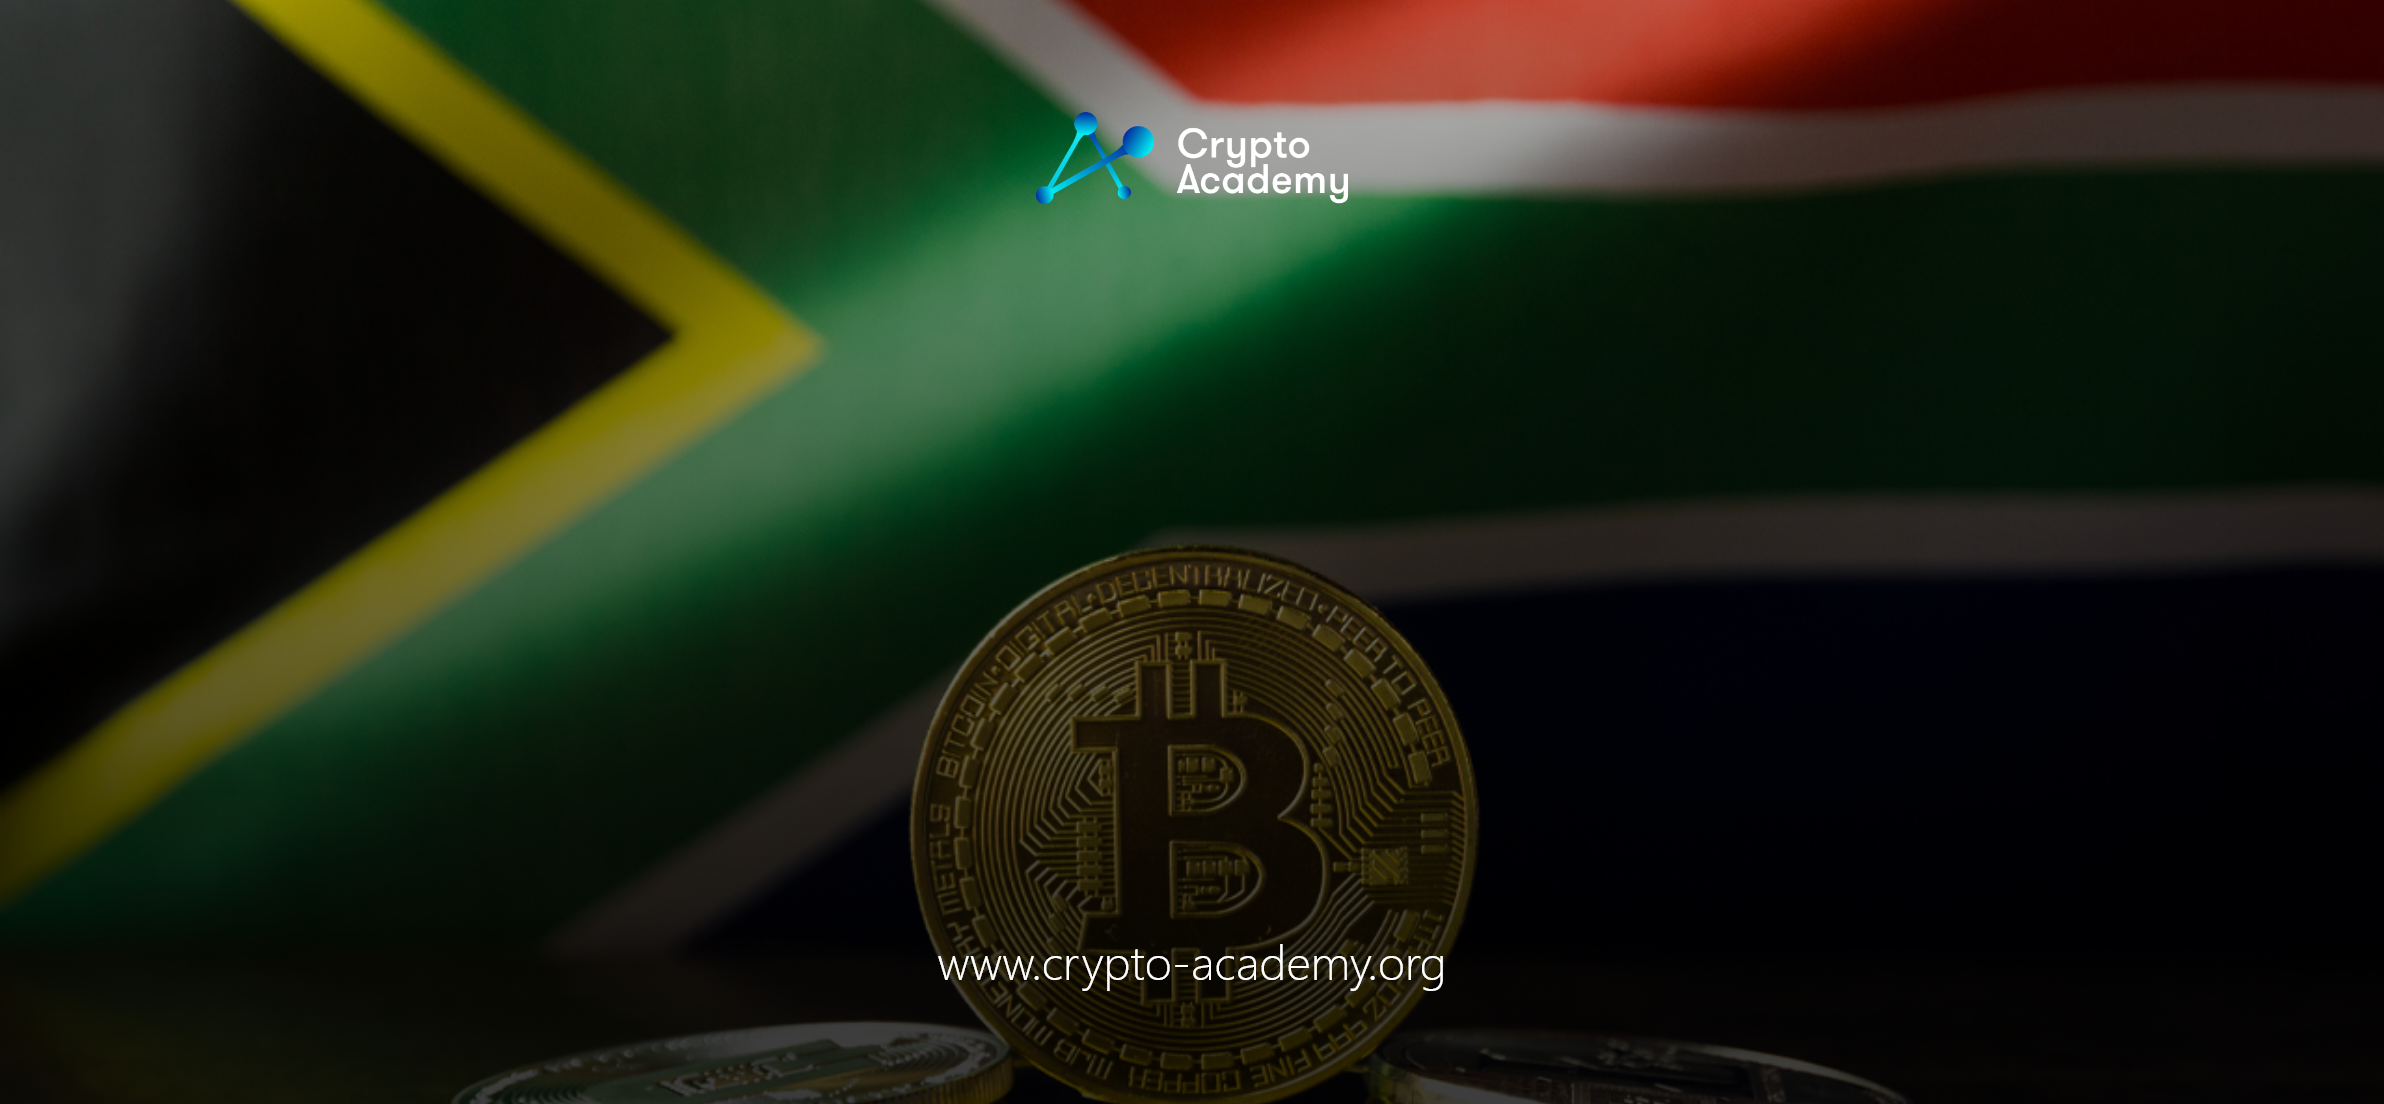 South African Elections Won't Alter Crypto Policies, Say Insiders